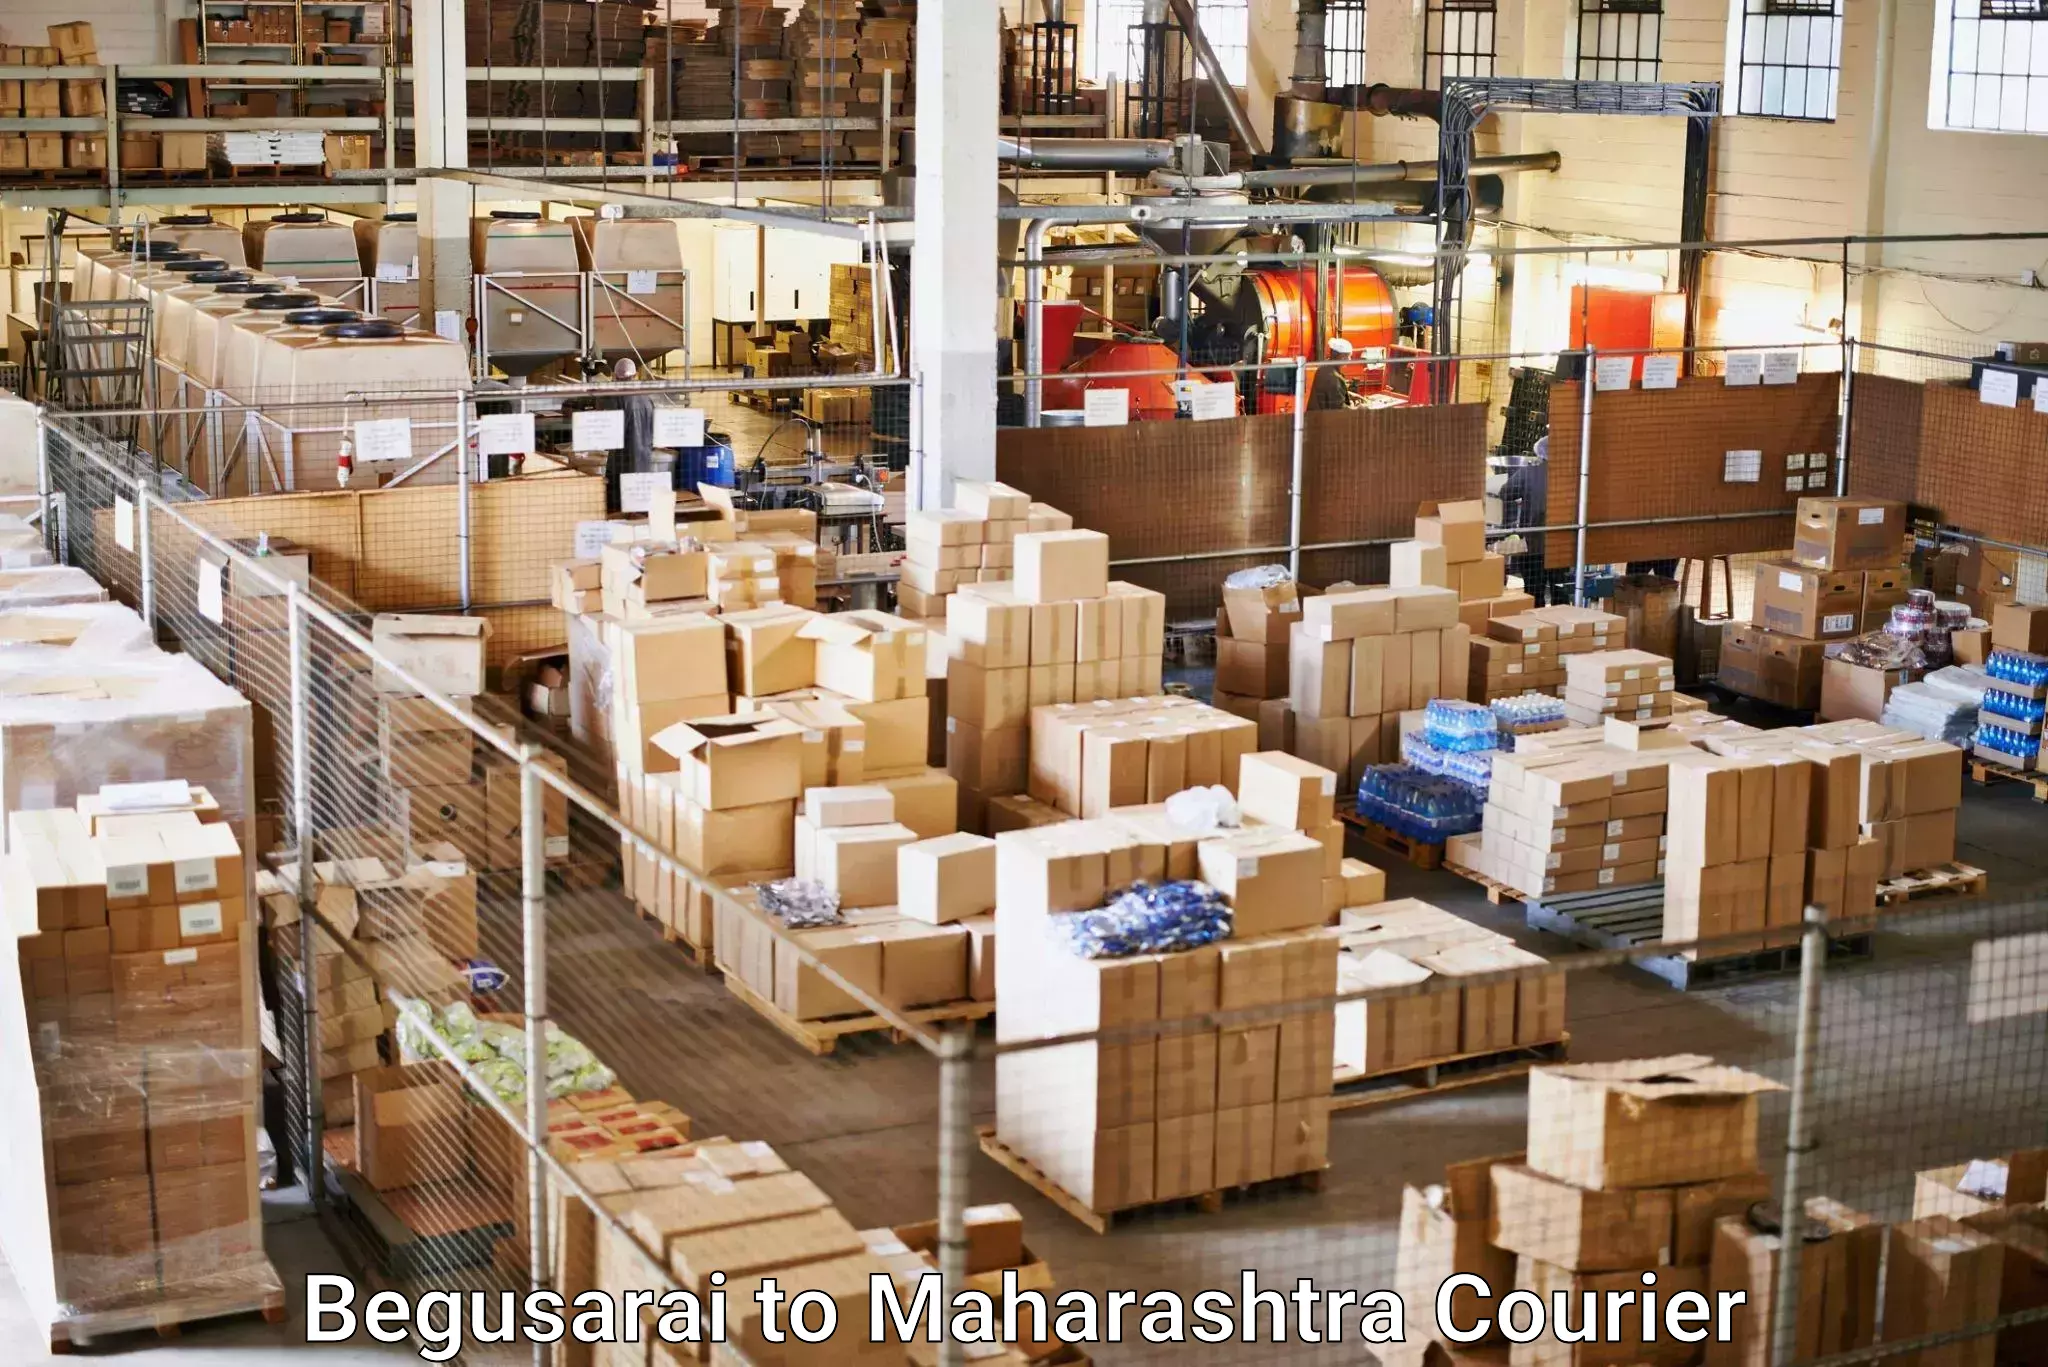 Quality courier partnerships Begusarai to Jafrabad Jalna